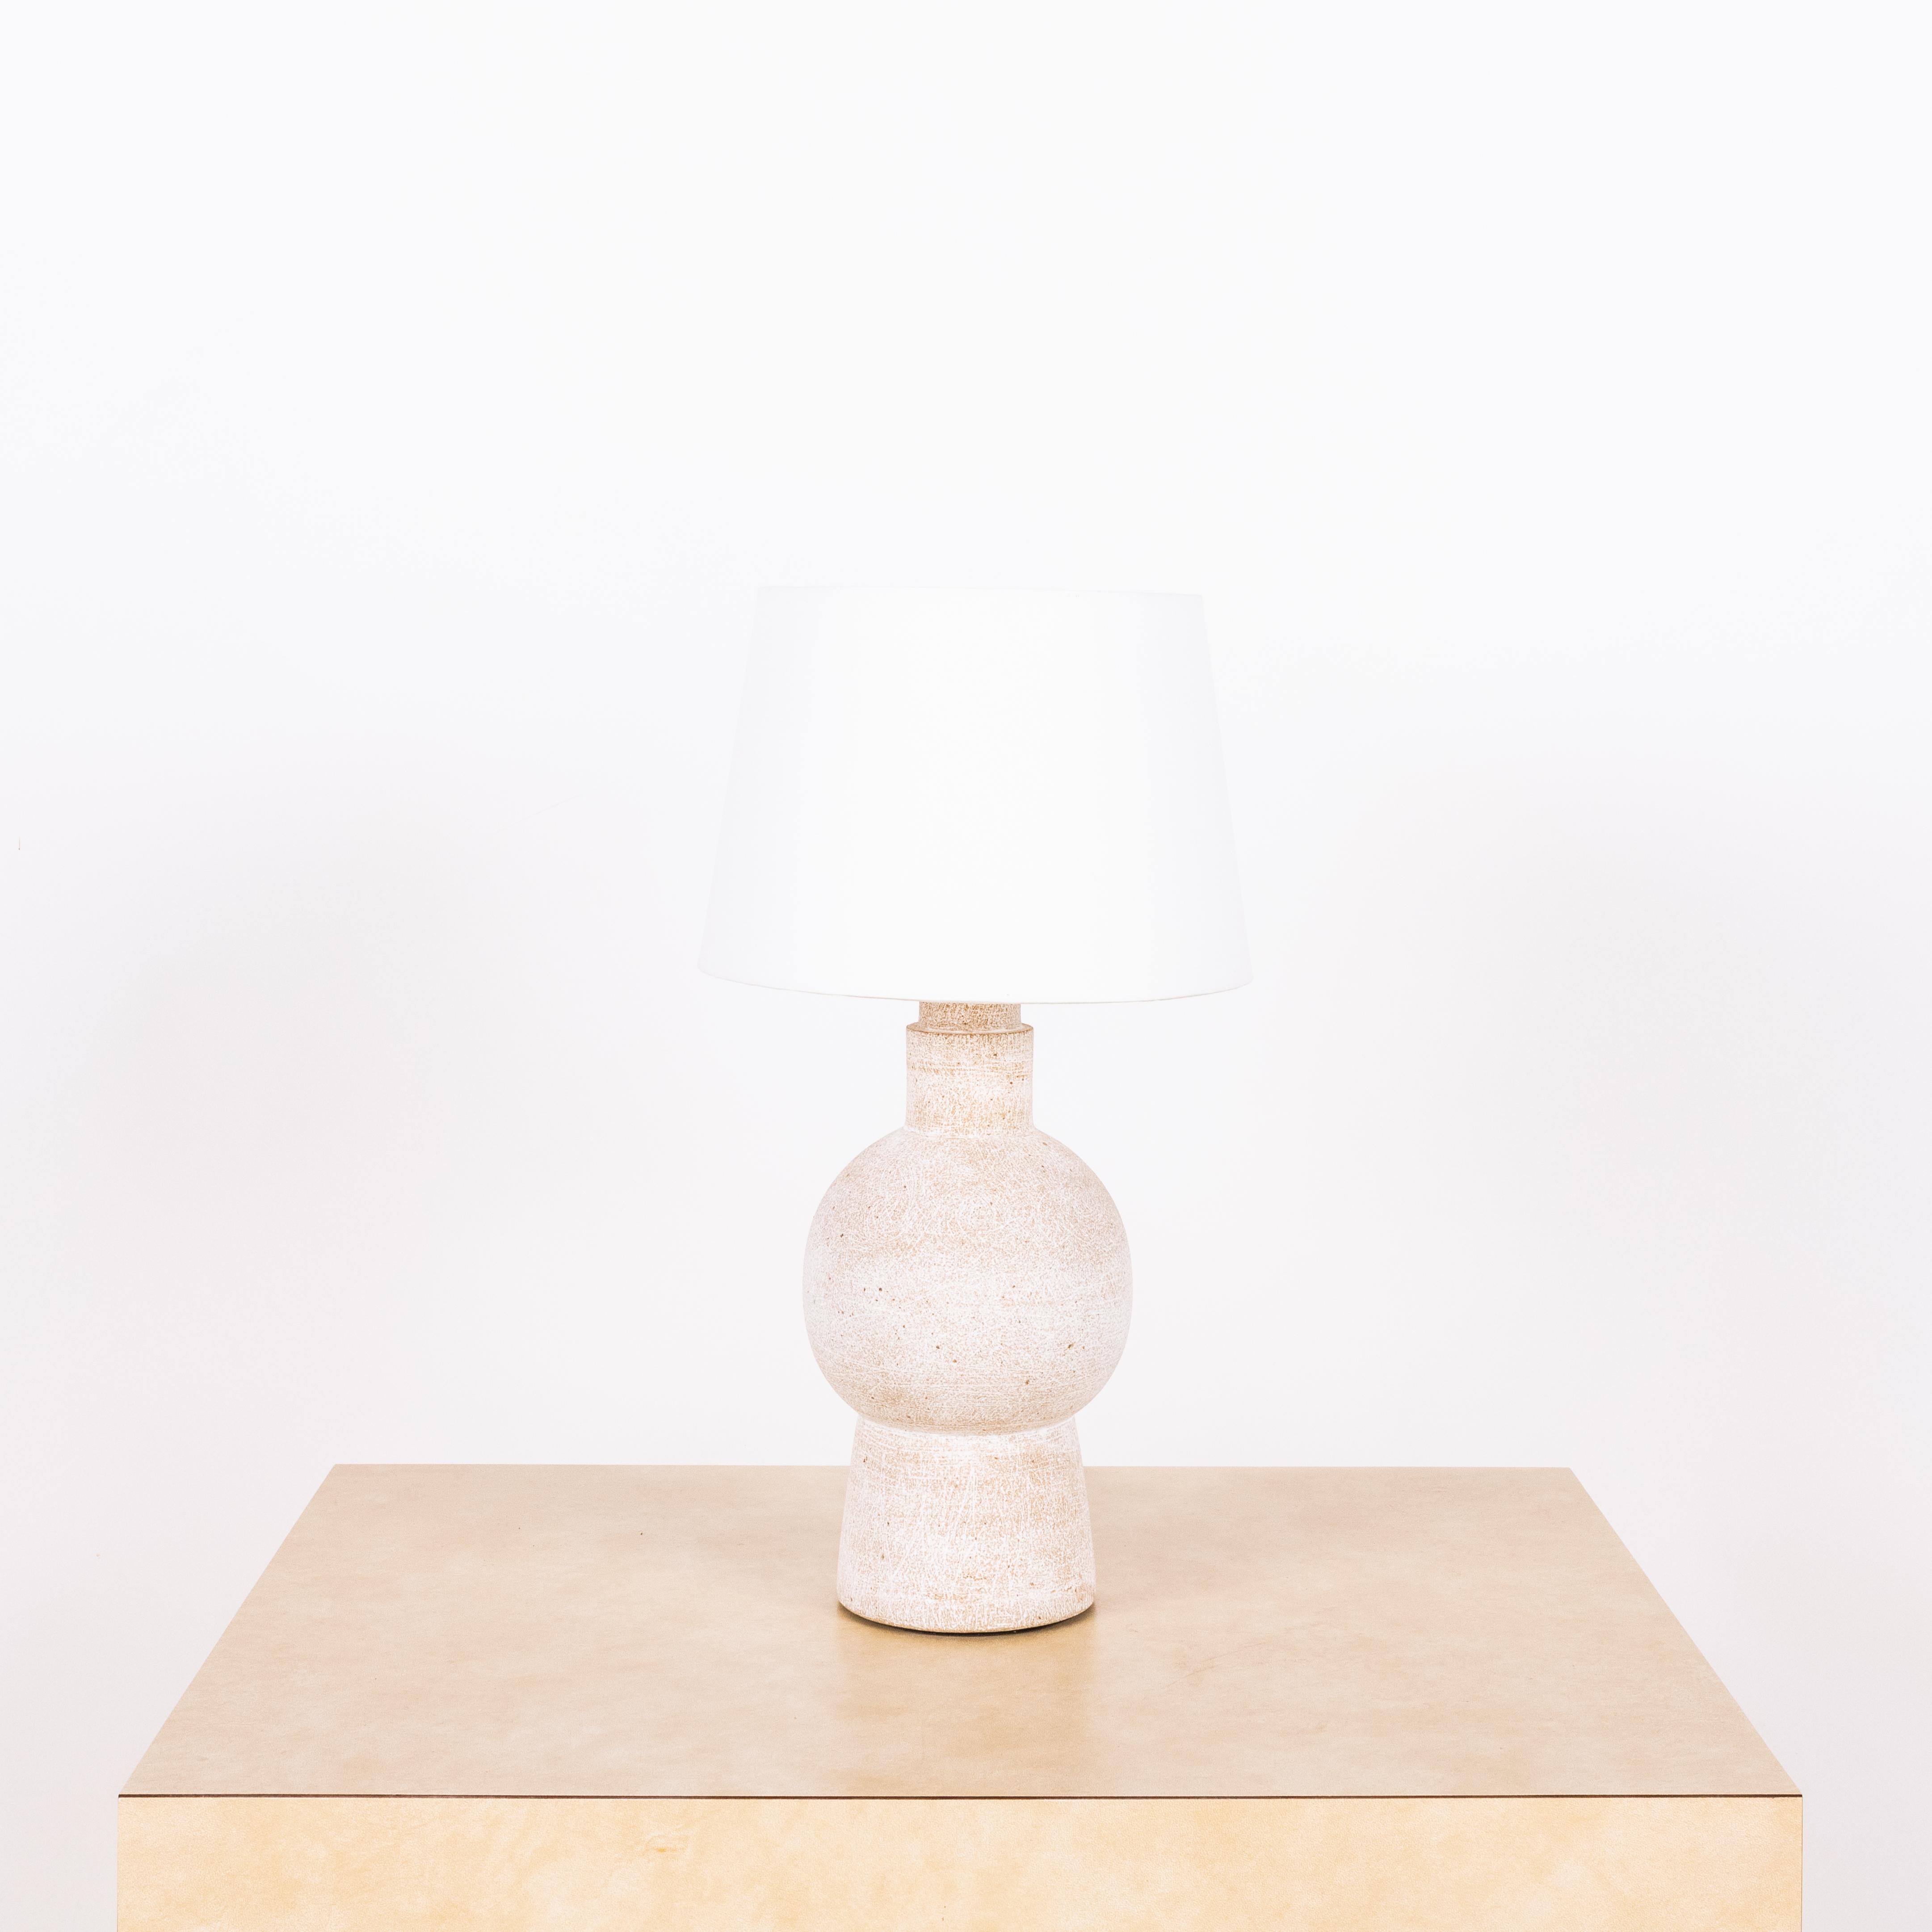 White 'Bilboquet' stoneware lamp by Design Frères.

Dimensions listed (10 in. diameter x 18 in. tall) are the overall dimensions of the lamp plus the shade (as pictured). The lamp base is 11 in. tall and the shade is 7 in. tall.

Wired with 3-way